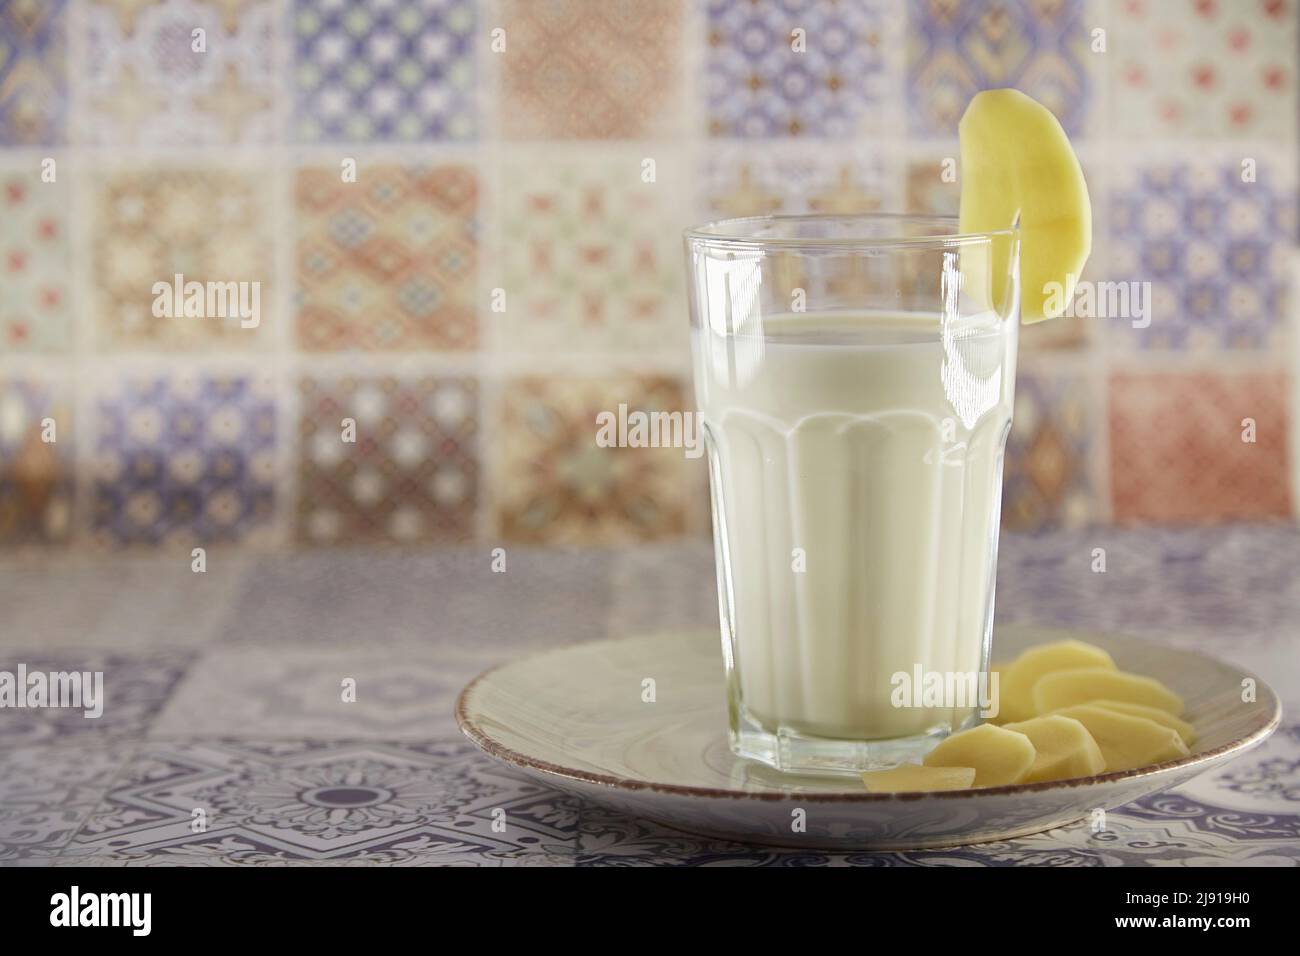 Alternative, non-dairy milk. Lactose free, environment friendly potato milk and potato on the plate on the table. Tile classic background. Copy space Stock Photo